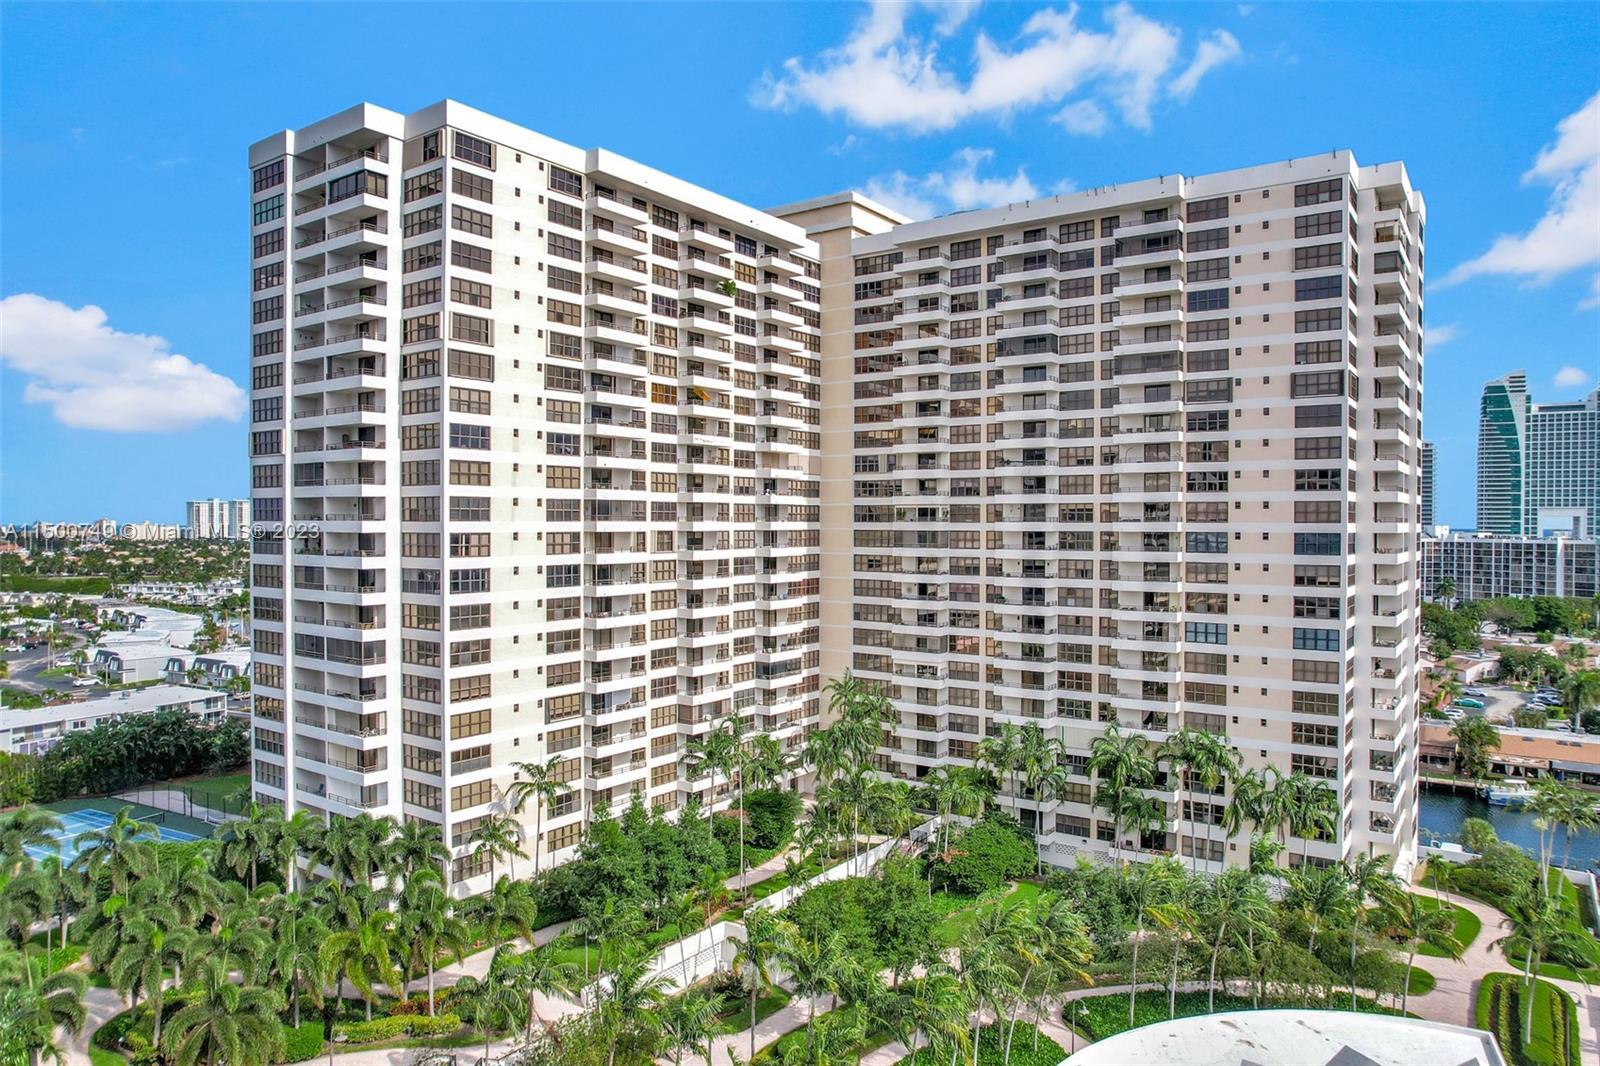 Photo of 2500 Parkview Dr #2212 in Hallandale Beach, FL